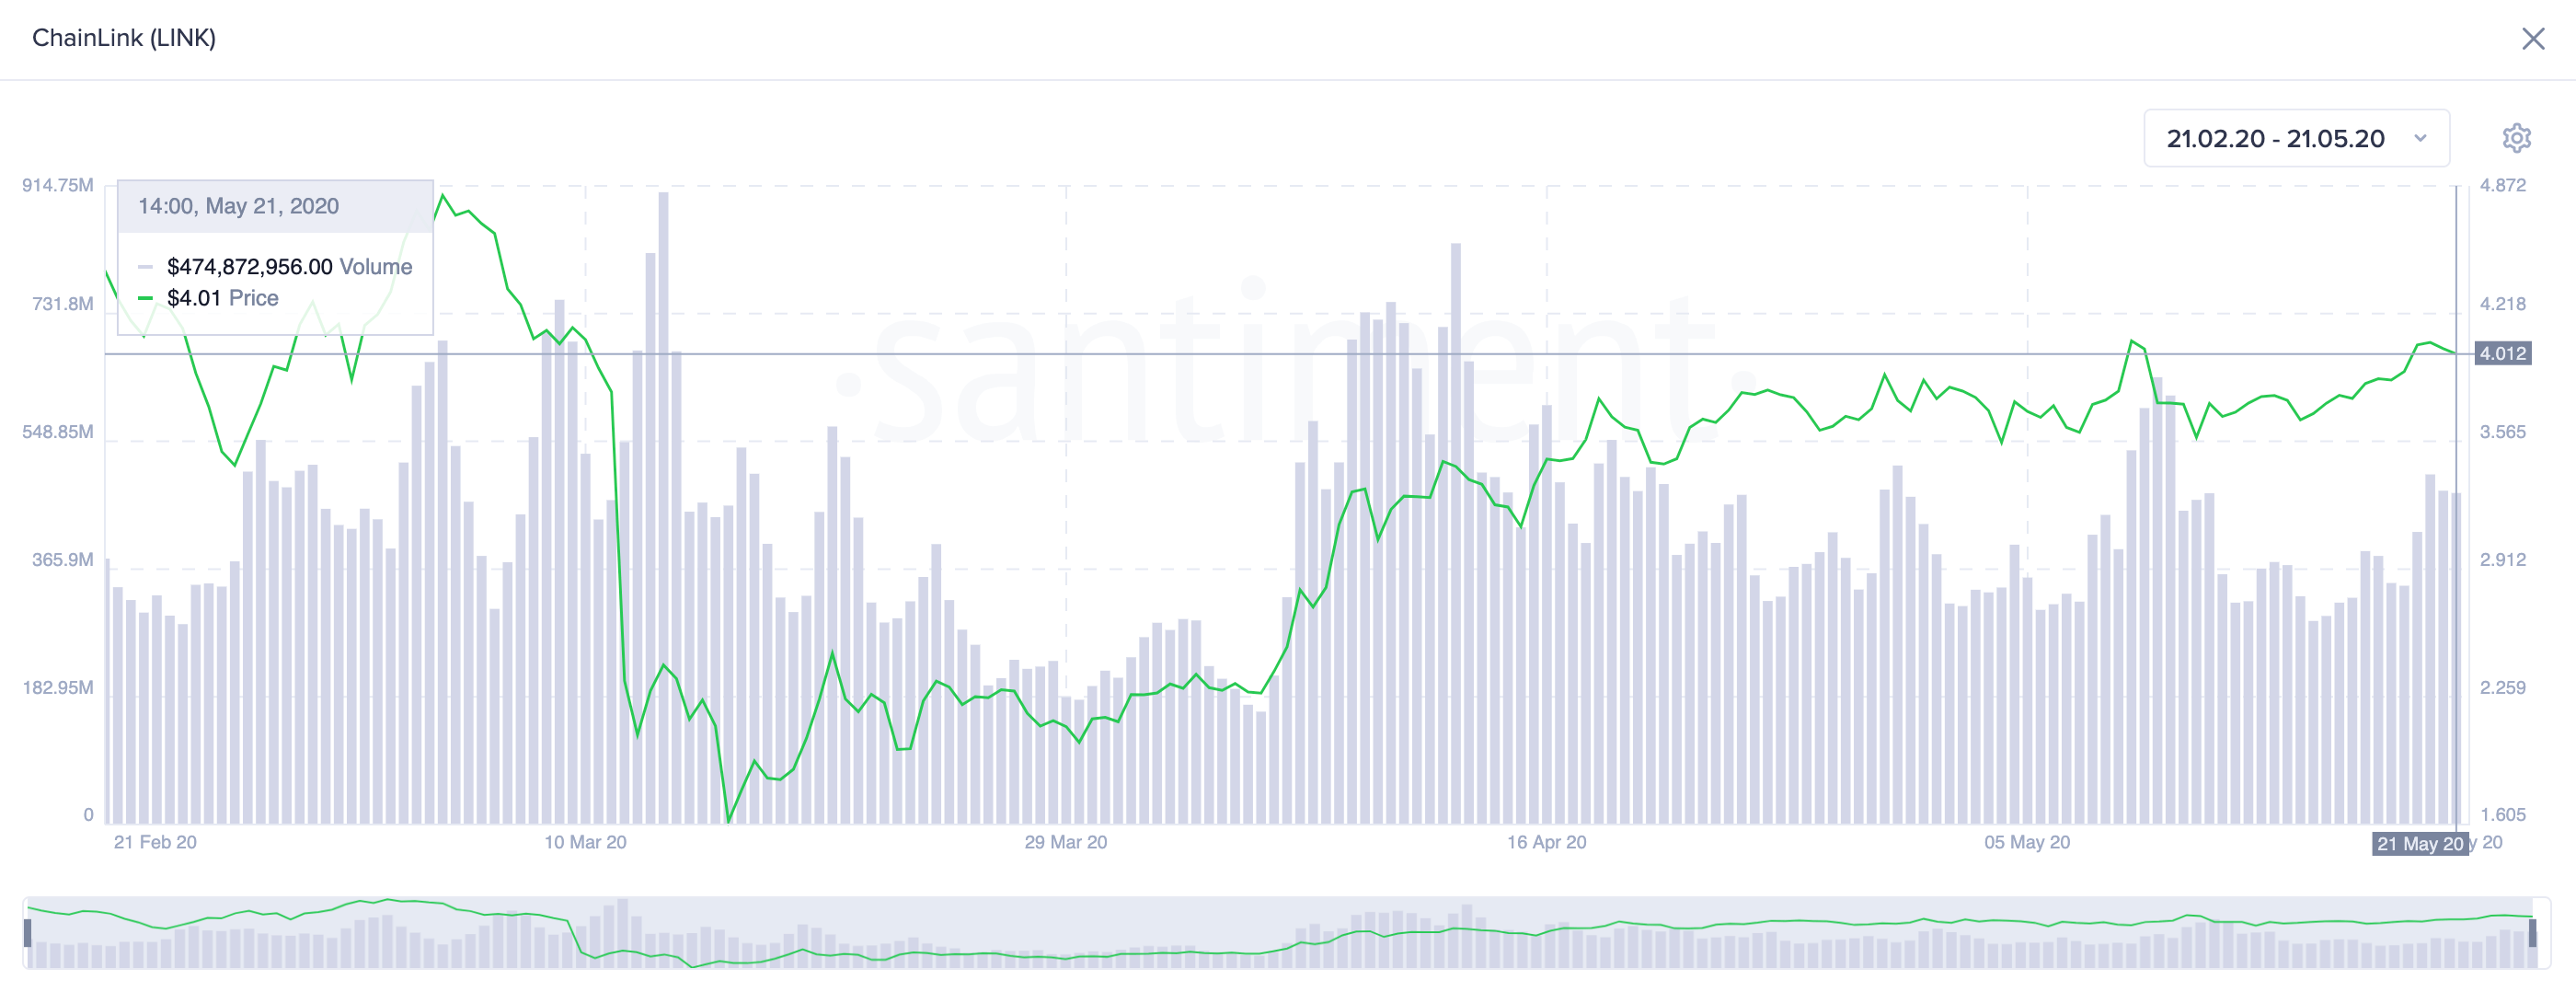 Chainlink's On-Chain Volume. (Source: Santiment)